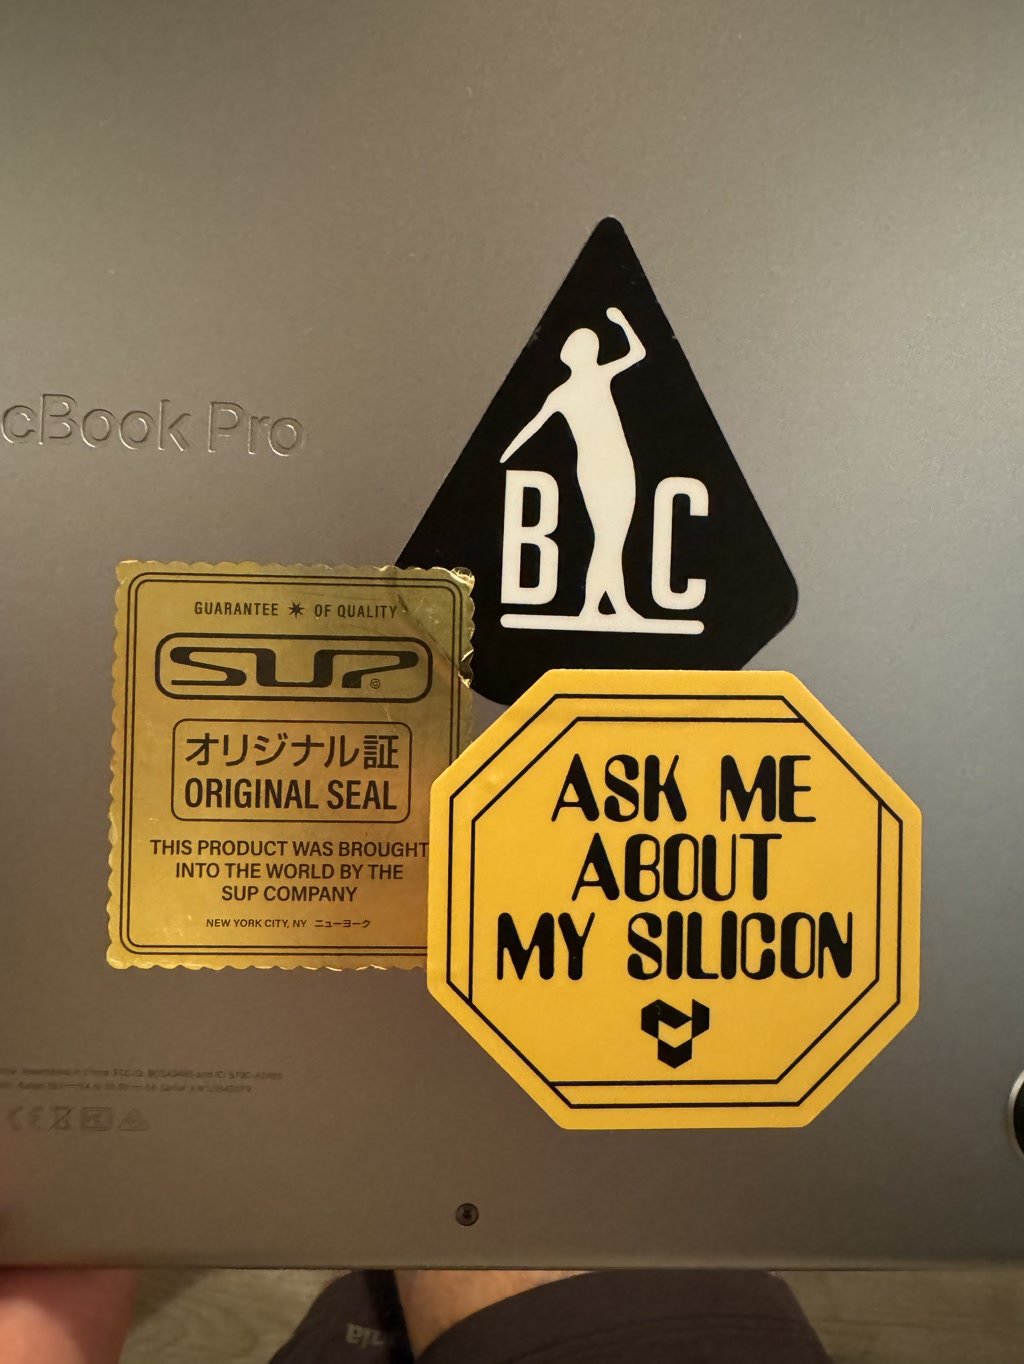 The bottom section of a MacBook Pro is shown adorned with three stickers. On the left is a golden rectangular sticker with stylized text and borders, resembling a vintage warranty seal. In the center is a triangular black sticker featuring a silhouette of a person with a hand reaching upwards, and the letters 'BC.' To the right is a yellow, hexagonal sticker with bold lettering that invites conversation about the owner's 'silicon,' alluding to the computer's processor. The laptop's aluminum surface has the model name embossed, and customary regulatory information printed at the bottom.